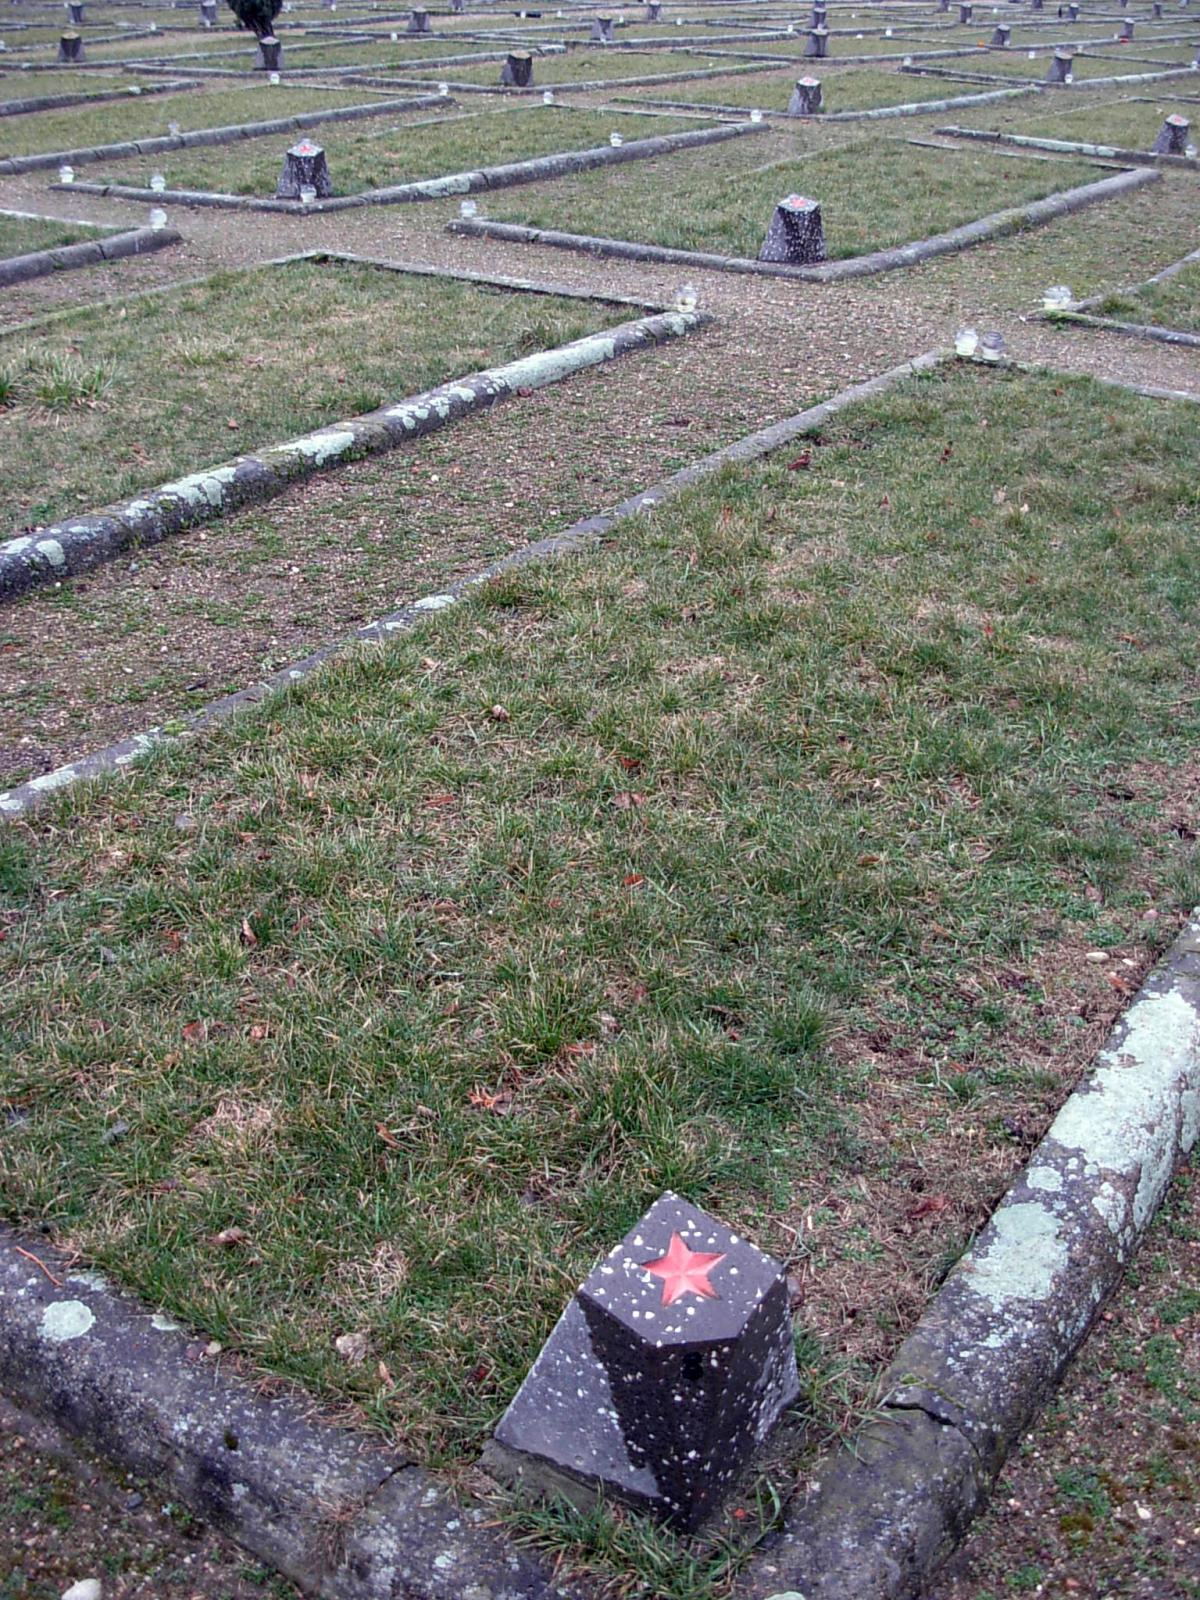 Wikipedia, Self-published work, Soviet military cemetery in Warsaw